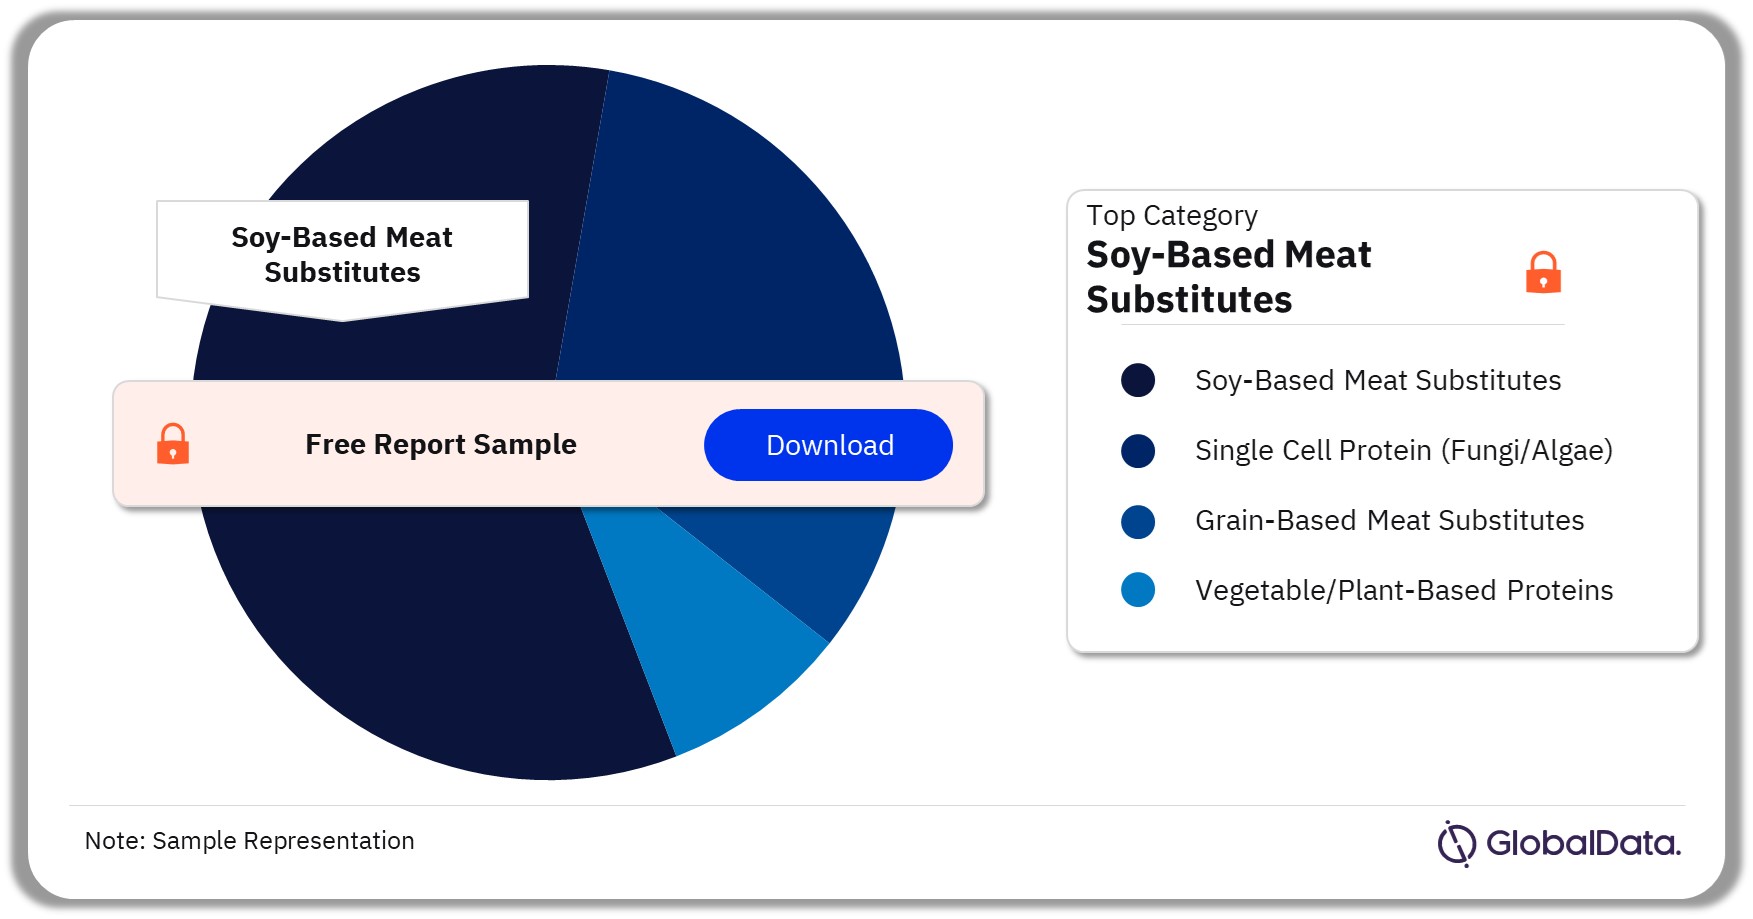 Australia Meat Substitutes Market, by Categories, 2021 (%)